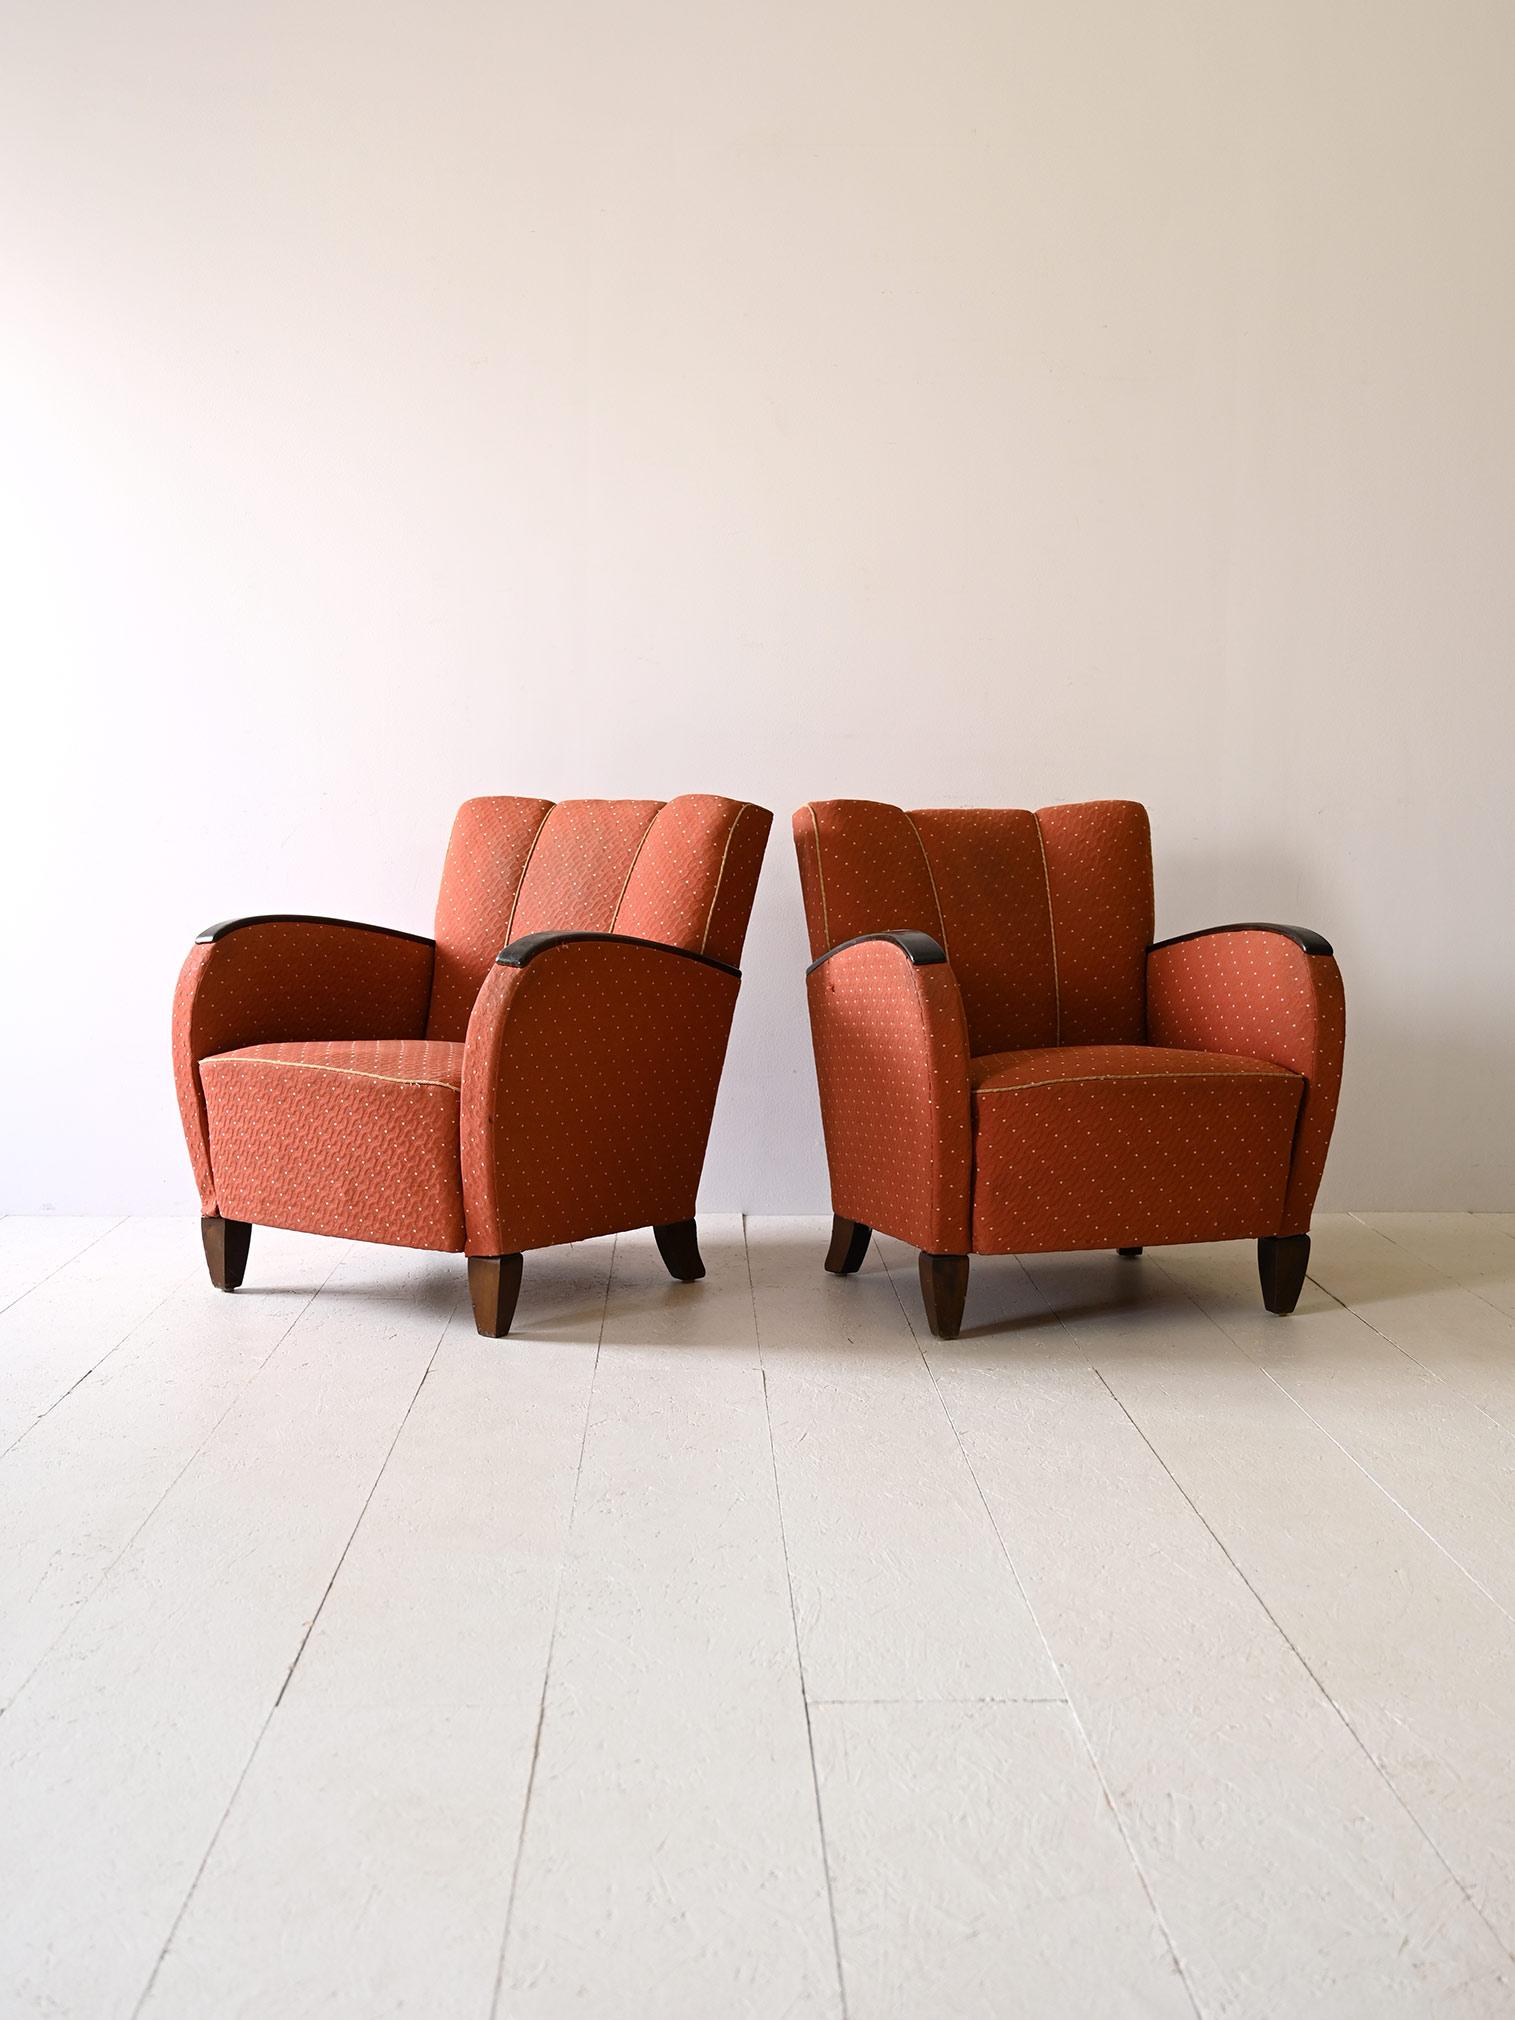 Pair of original deco armchairs from the 1930s.

The armchairs are distinguished by their stained wood arms, with a gray hue that harmonizes beautifully with the period fabric. The red stitching adds a lively touch and creates a fascinating